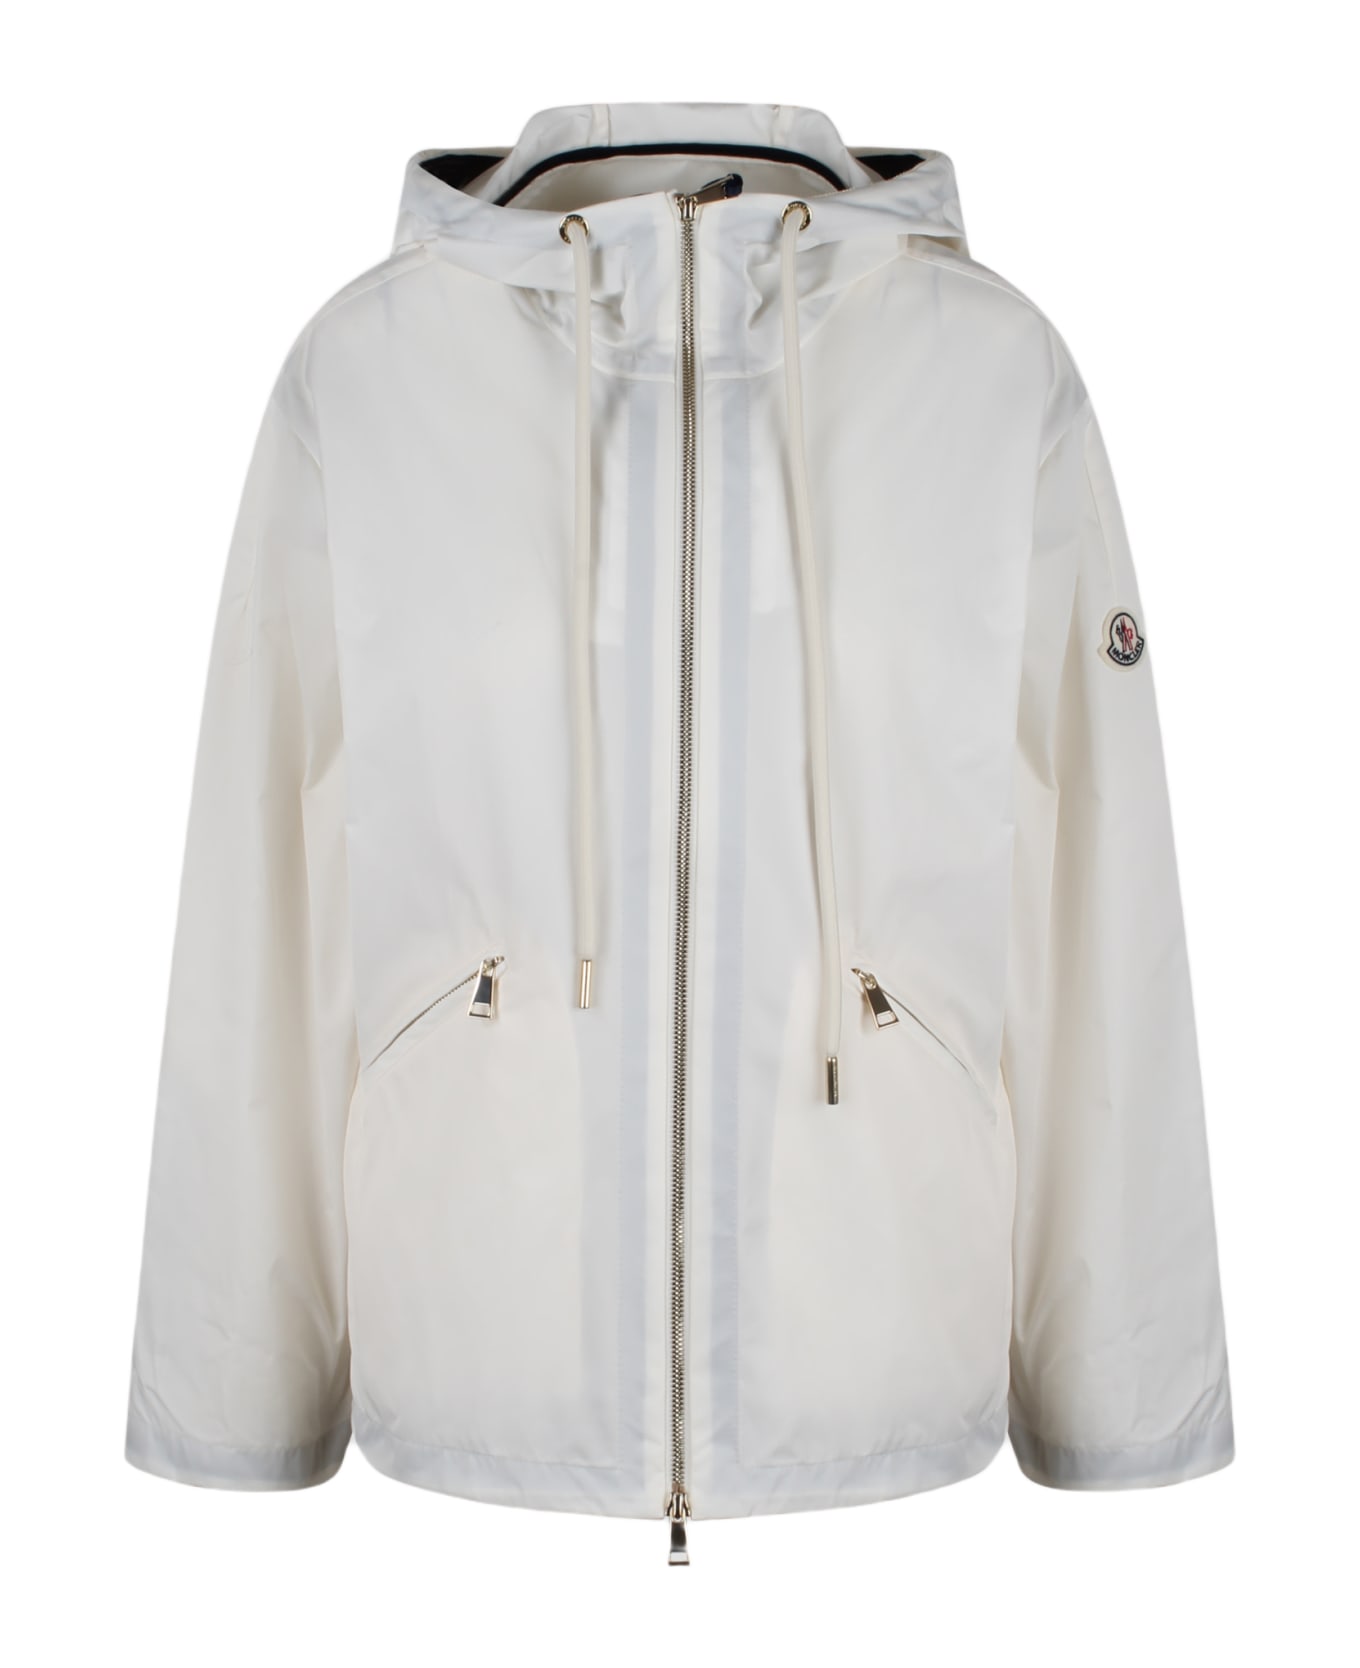 Moncler Cassiopea Hooded Jacket - White